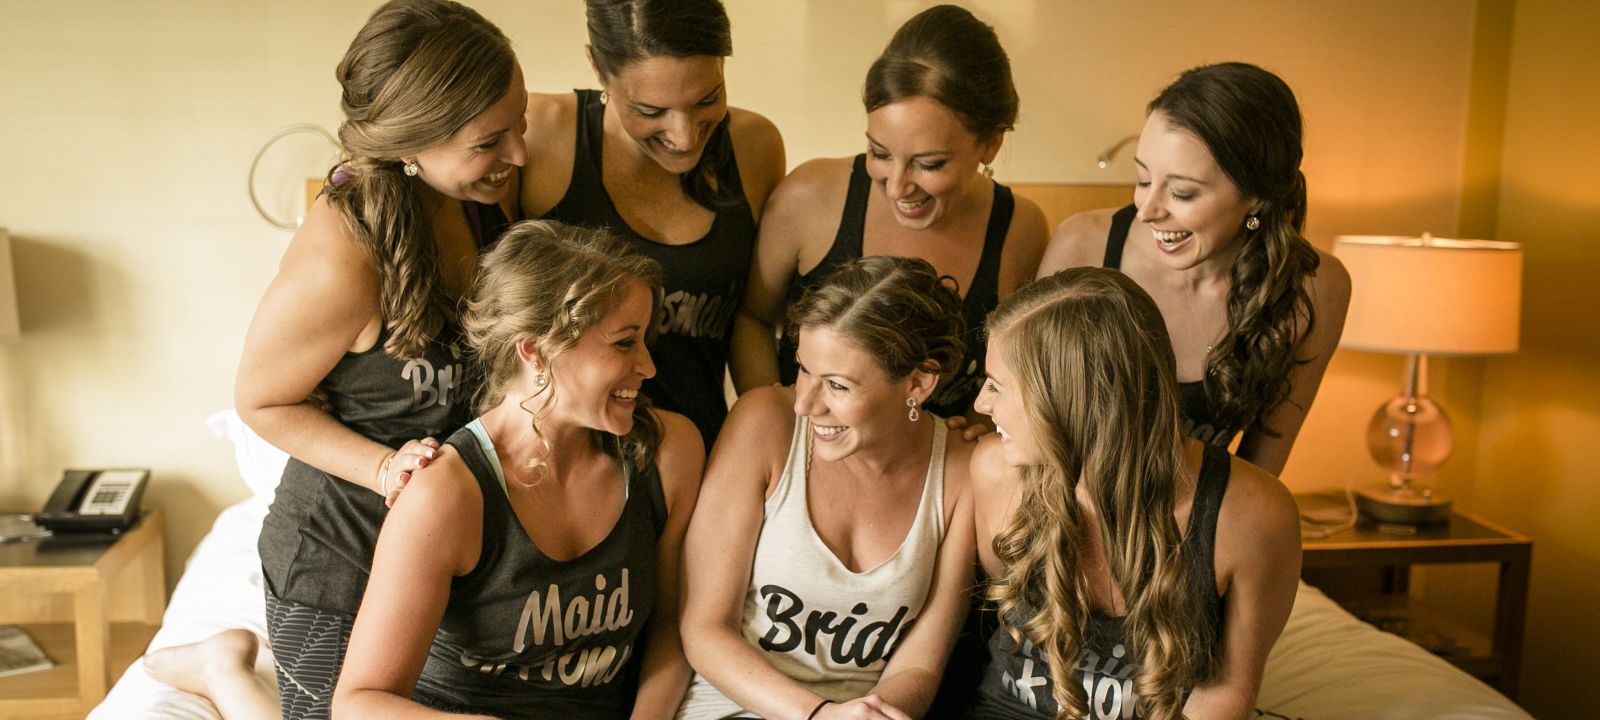 Bridesmaids and a bride smiling at each other at one of Colonnade Hotel's guest suites in Boston